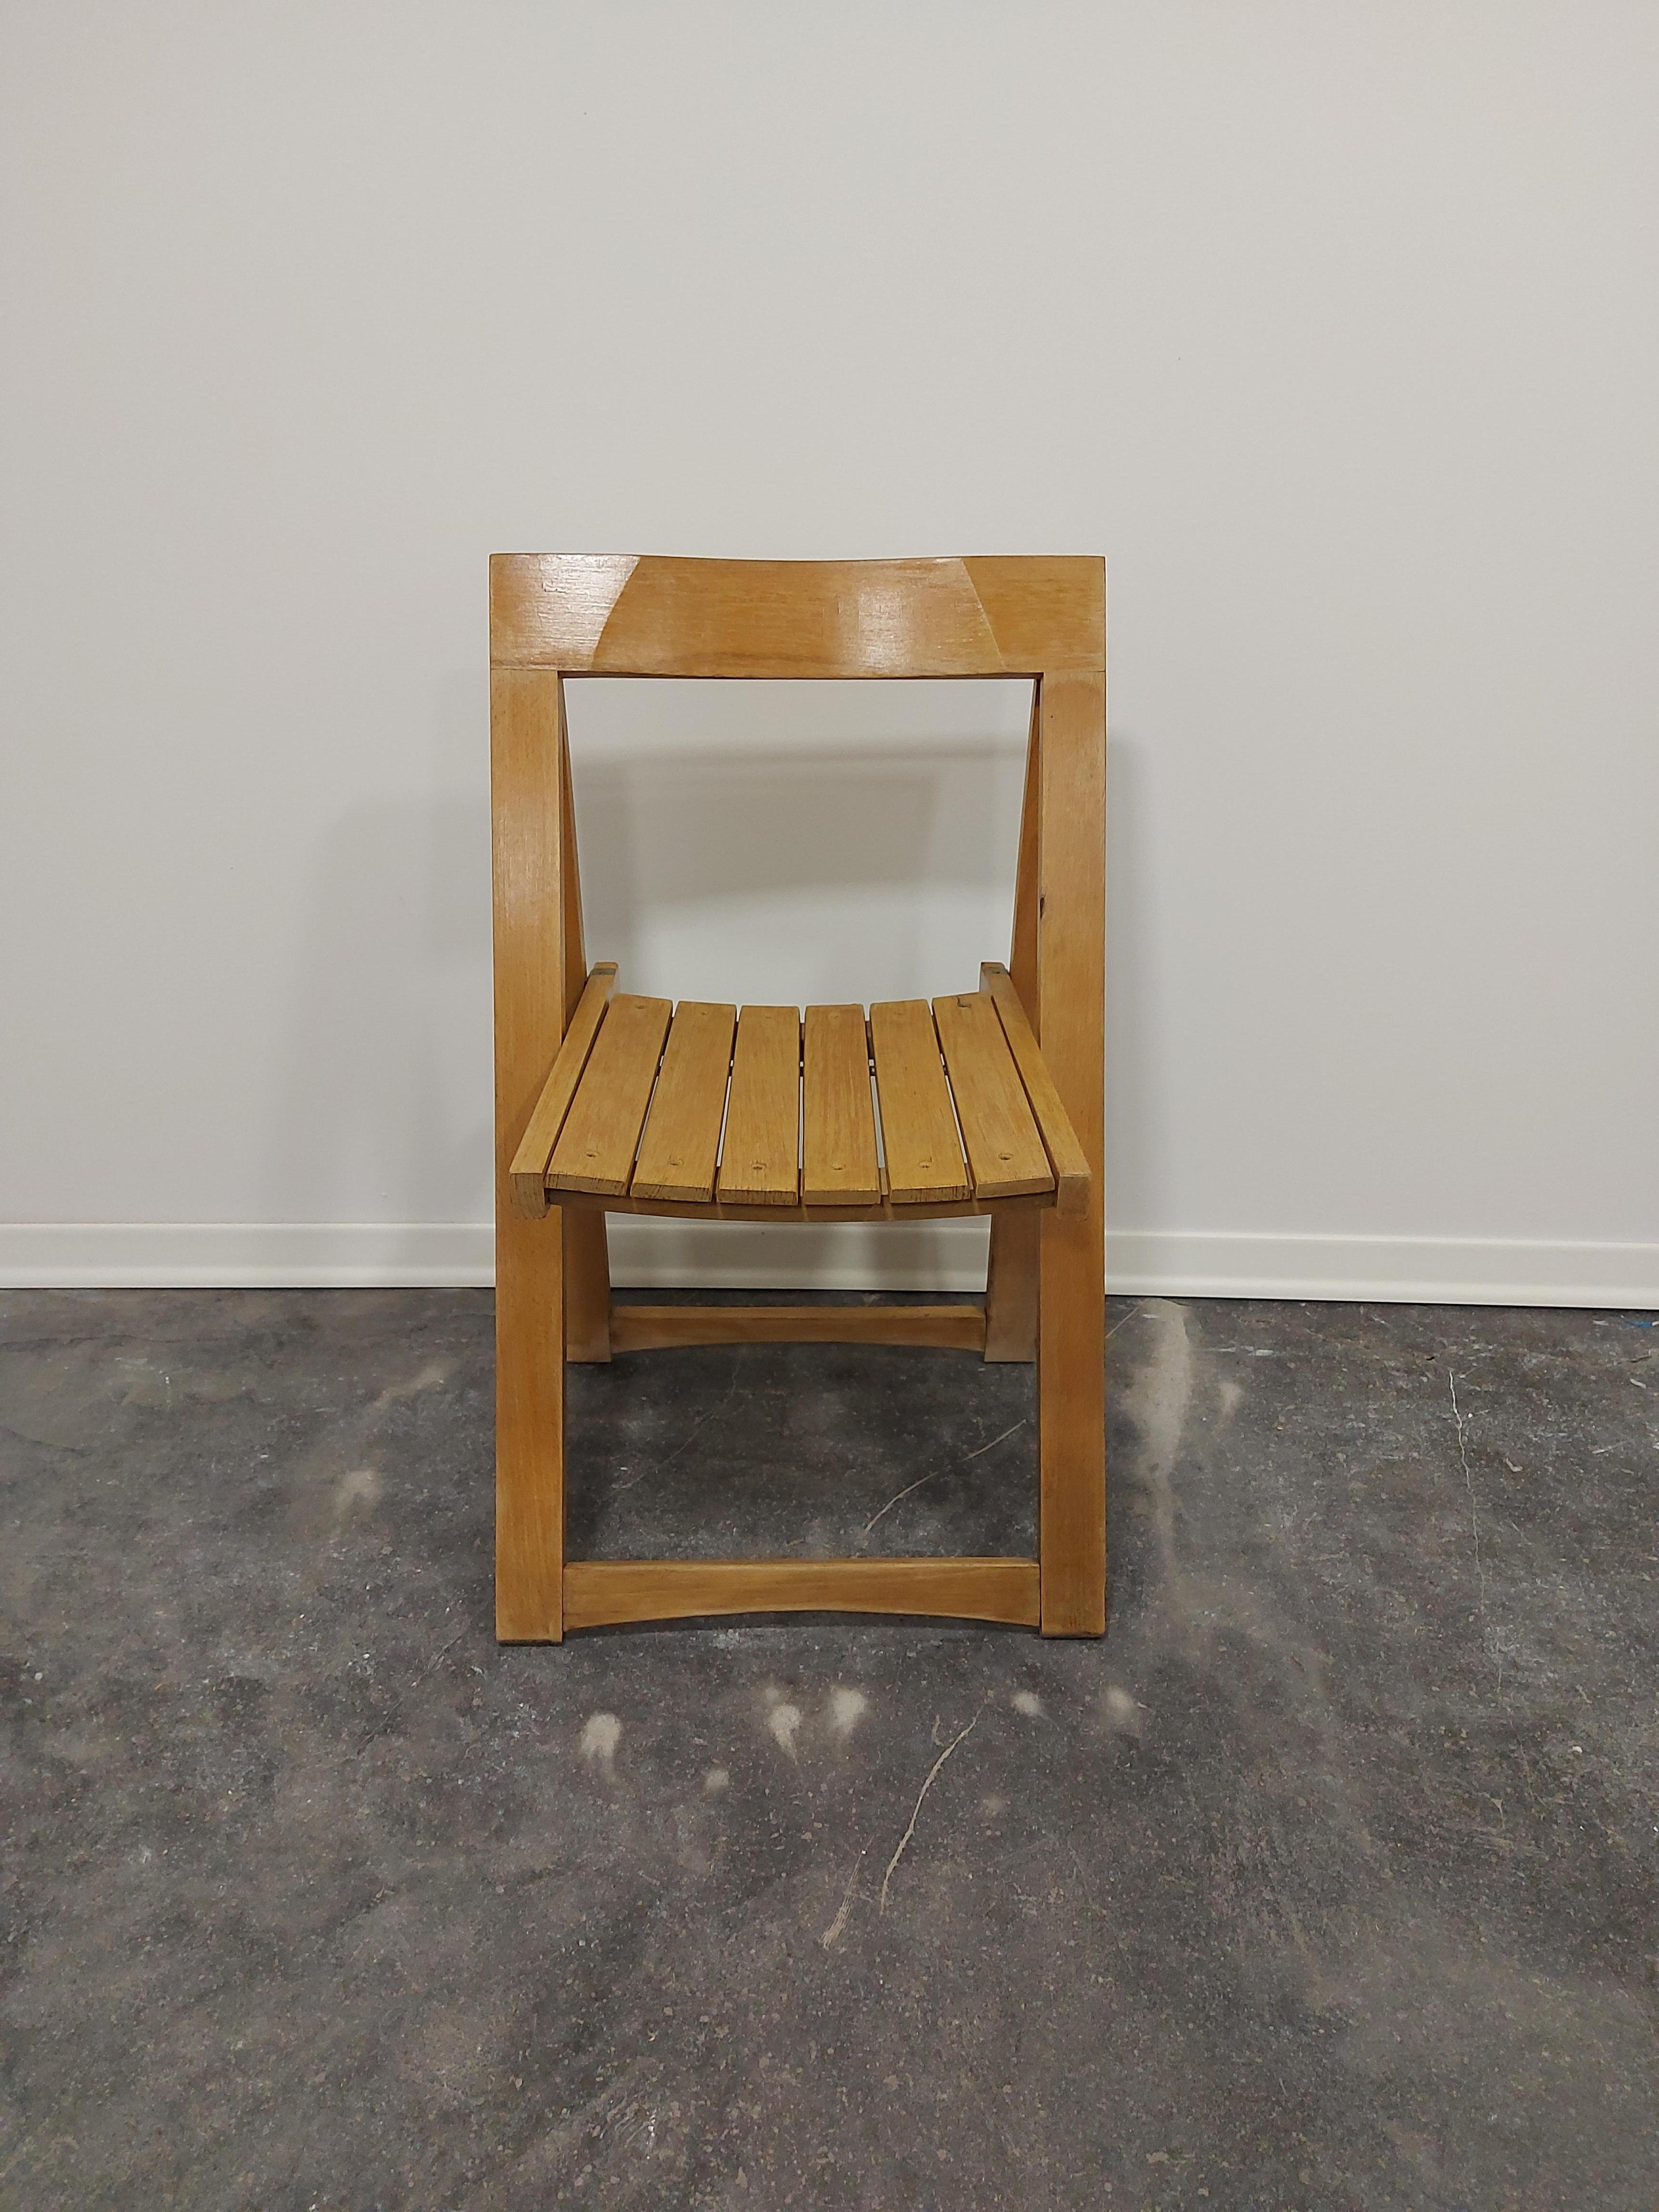 Hardwood Folding Chair by Aldo Jacober, 1970s 1 of 4 For Sale